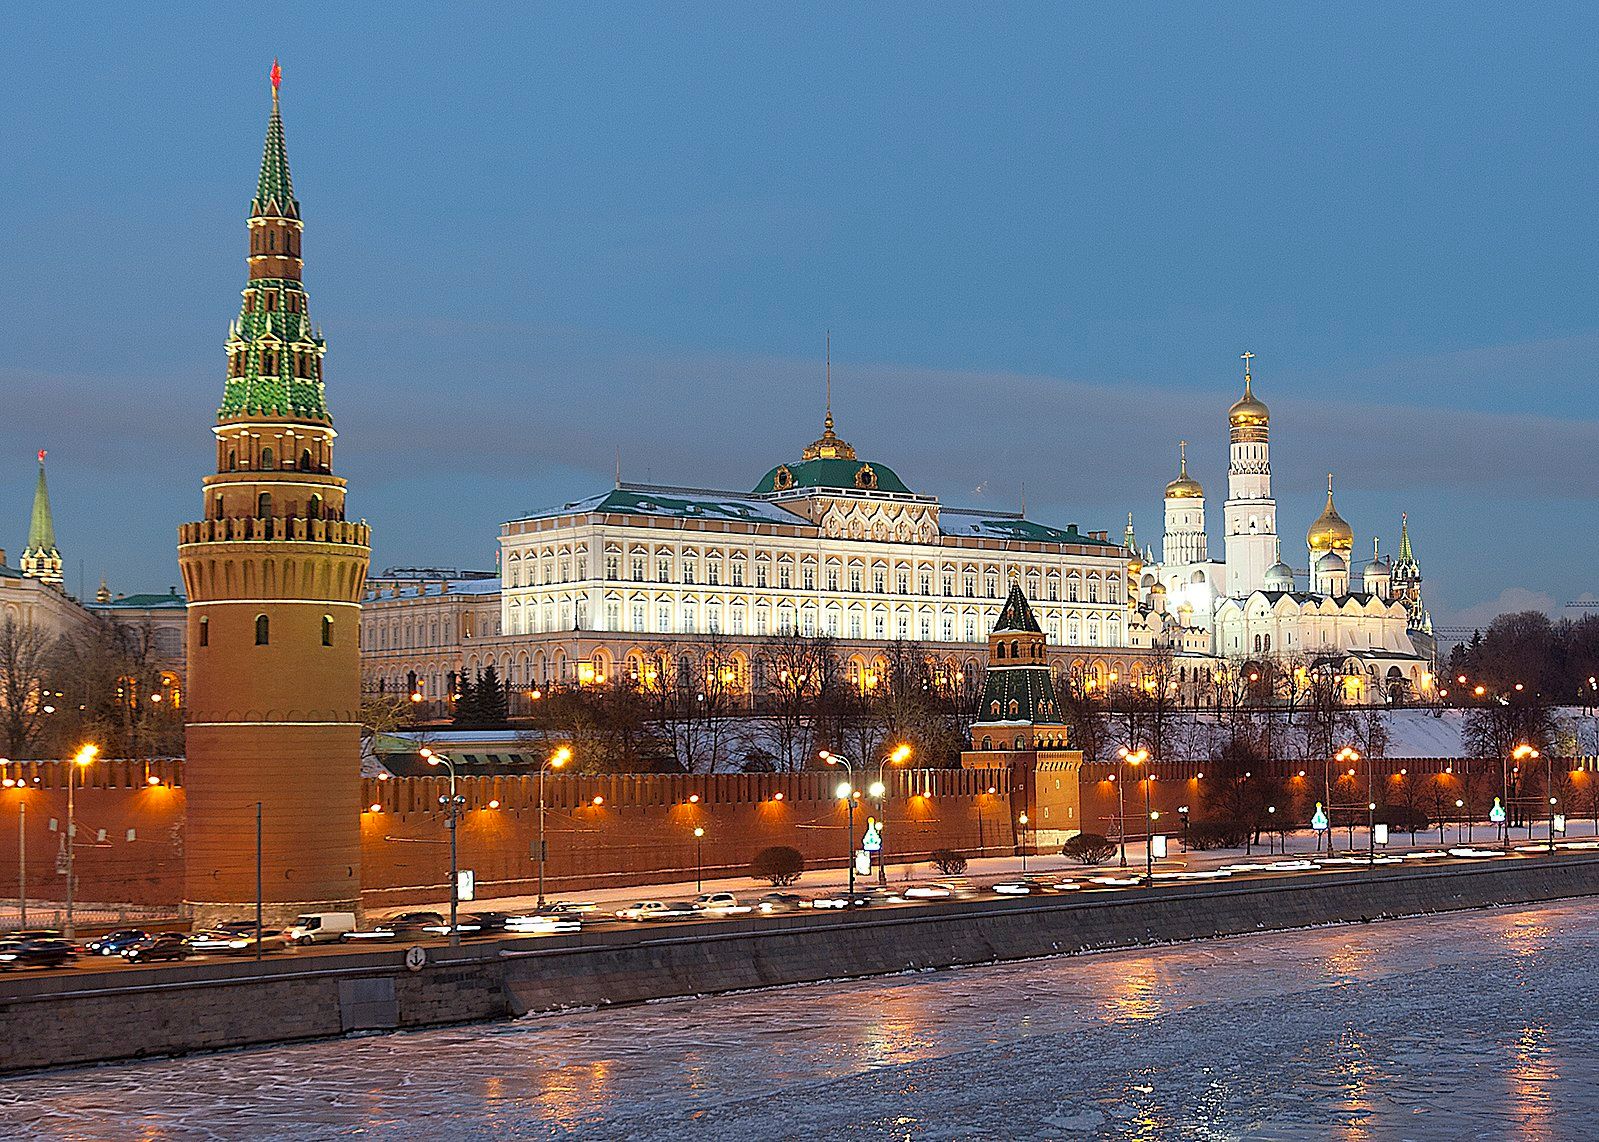 Russia’s Open-Source Code and Private-Sector Cybersecurity Ecosystem